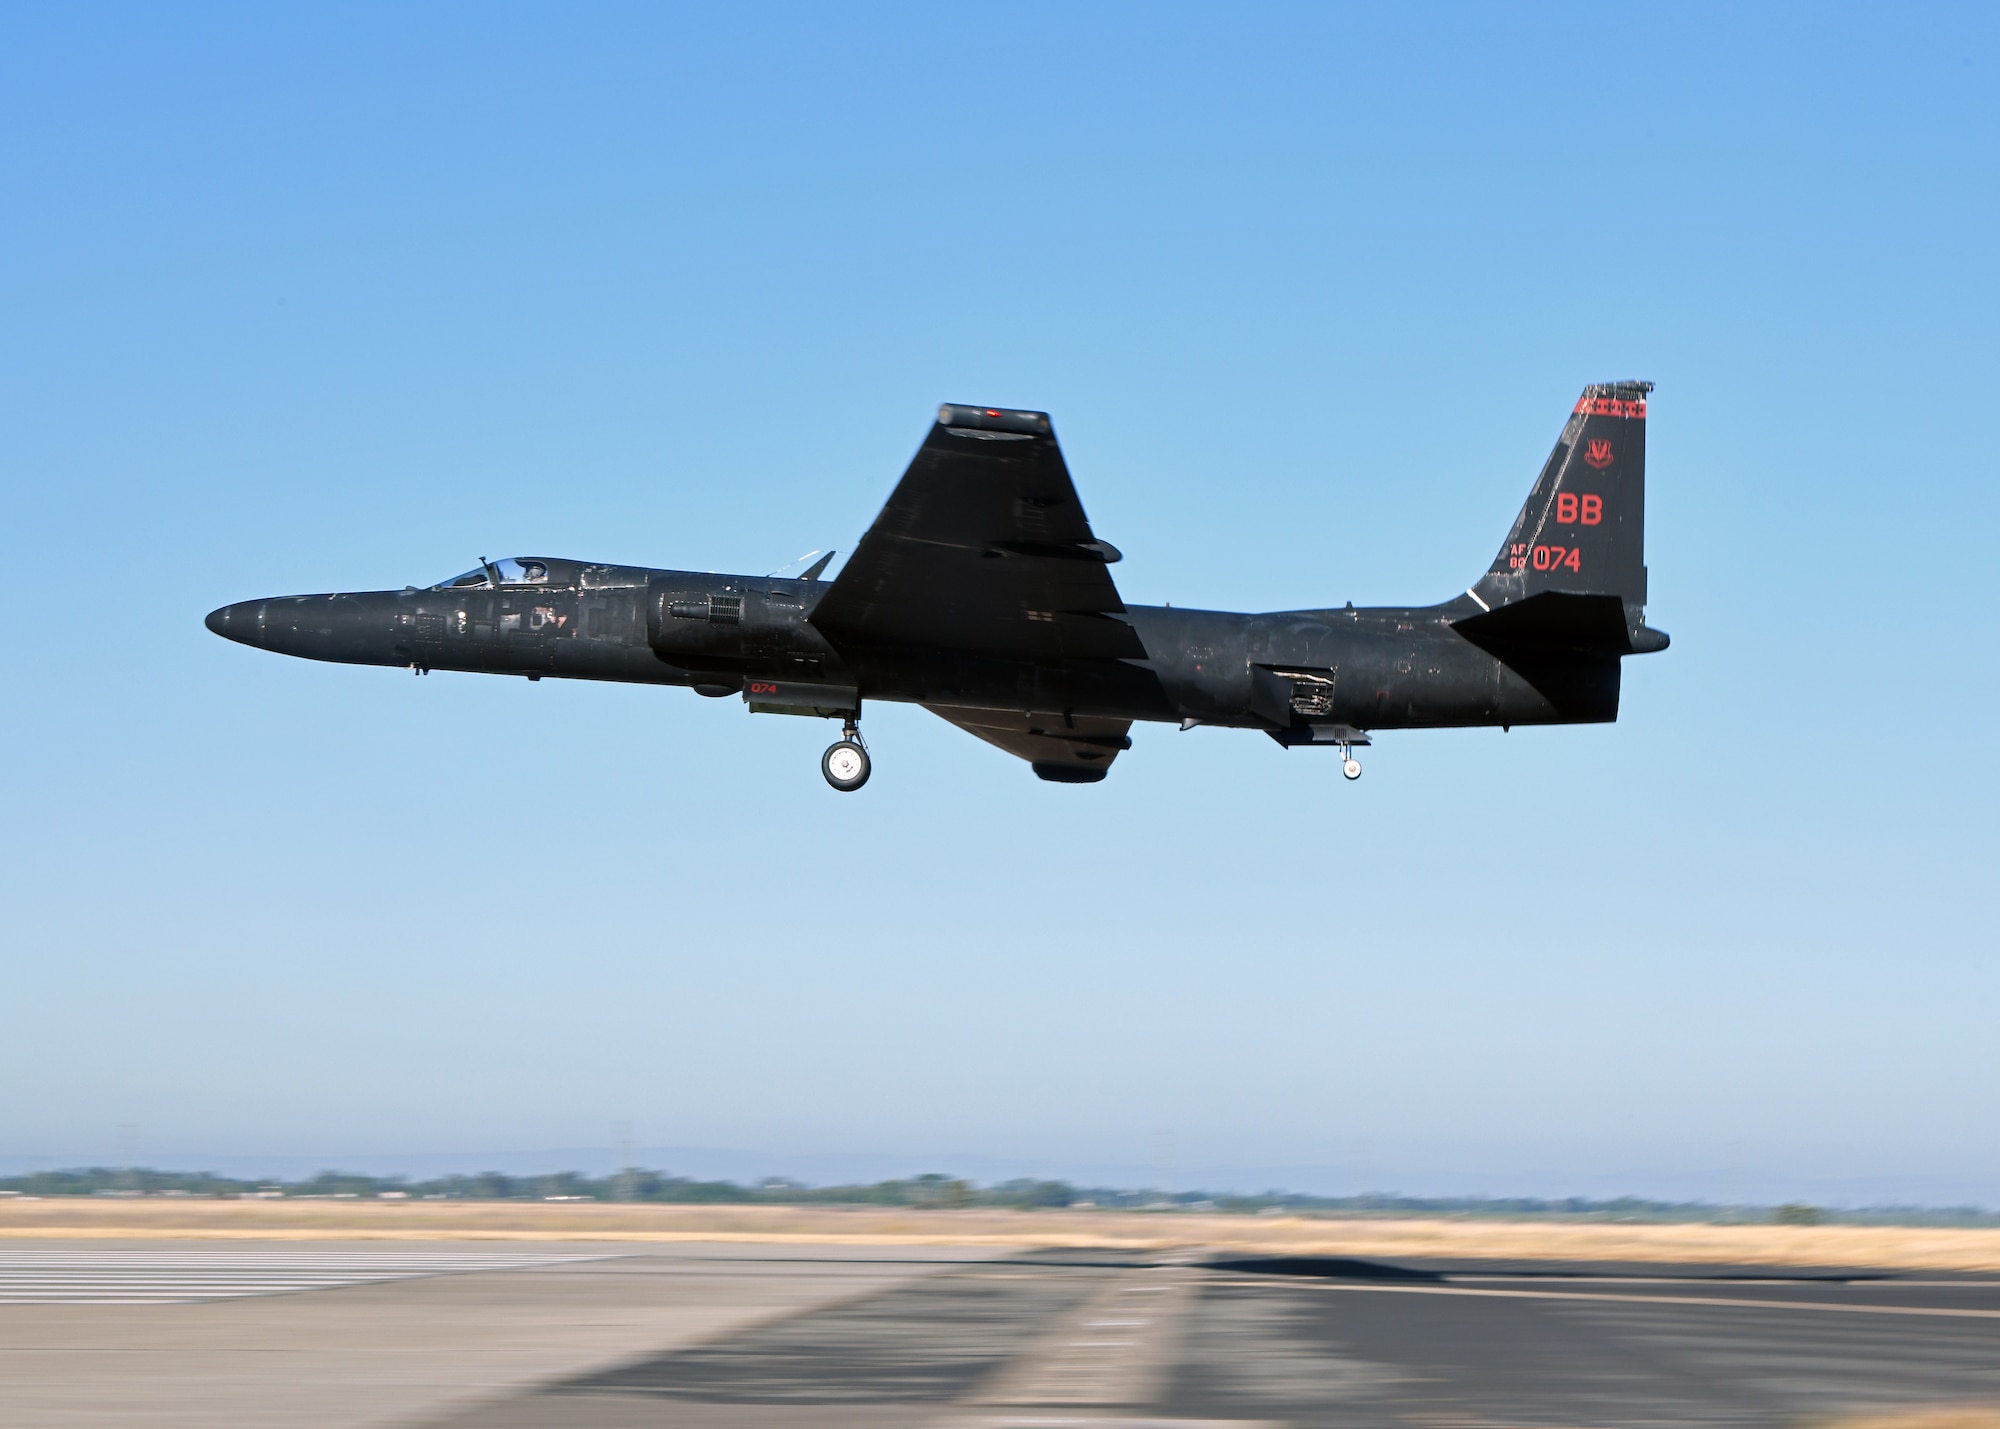 A U-2 Dragon Lady piloted by retired Lt. Col. Jonathan Huggins, 1st Reconnaissance Squadron U-2 instructor pilot, prepares for landing July 31, 2020 at Beale Air Force Base, California. The bicycle-type landing gear and low-altitude handling characteristics of the U-2 require precise control inputs during landing. (U.S. Air Force photo by Airman 1st Class Luis A. Ruiz-Vazquez)